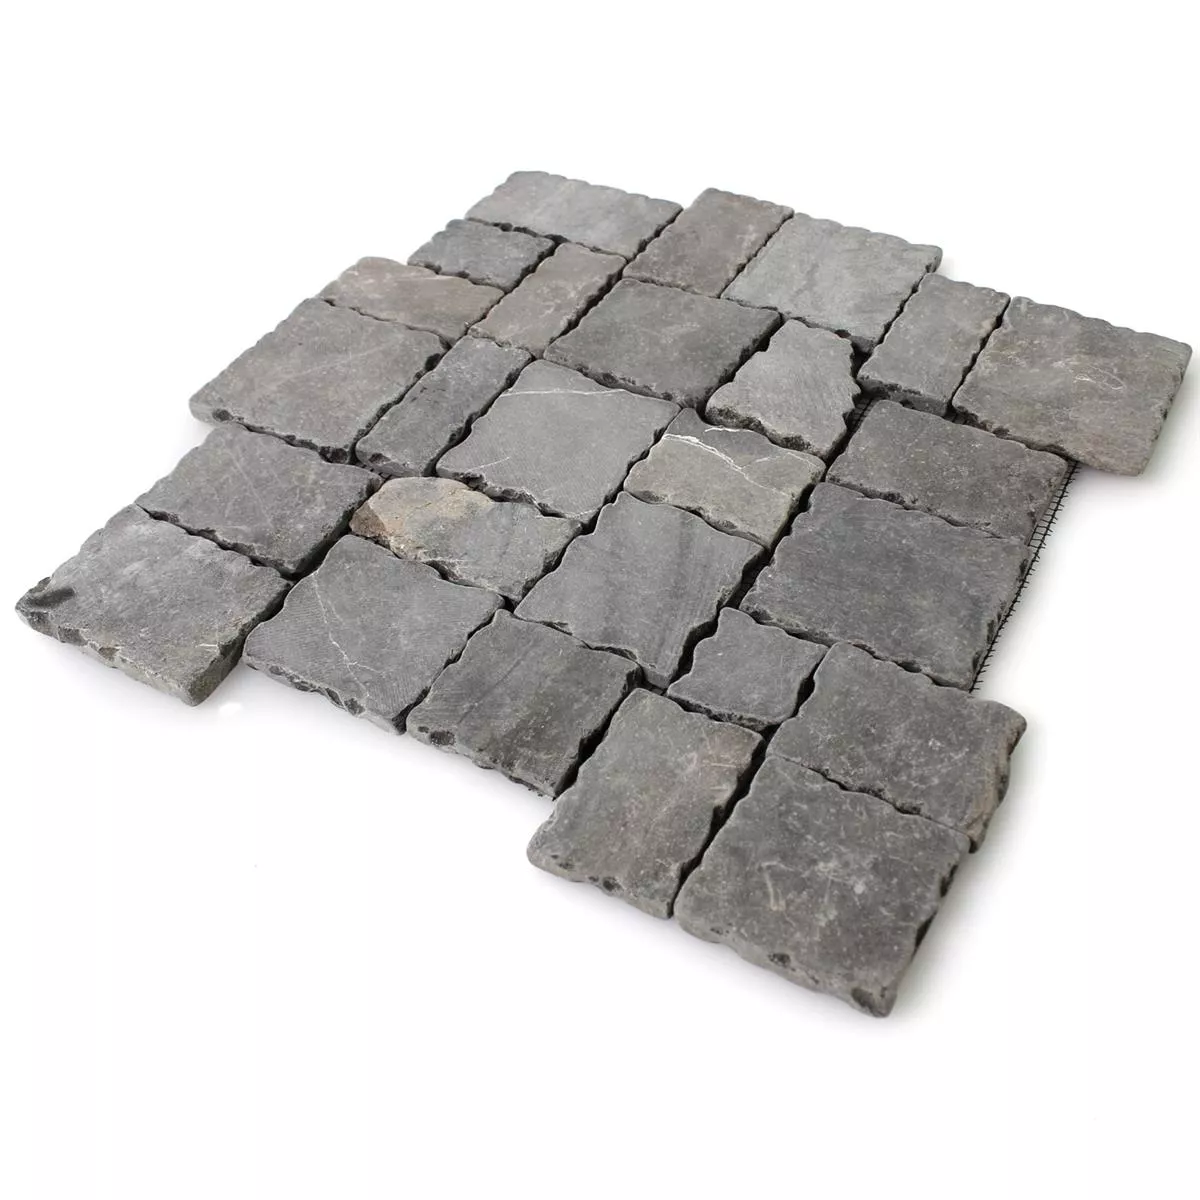 Sample Mosaic Tiles Natural Stone Anthracite Drummed